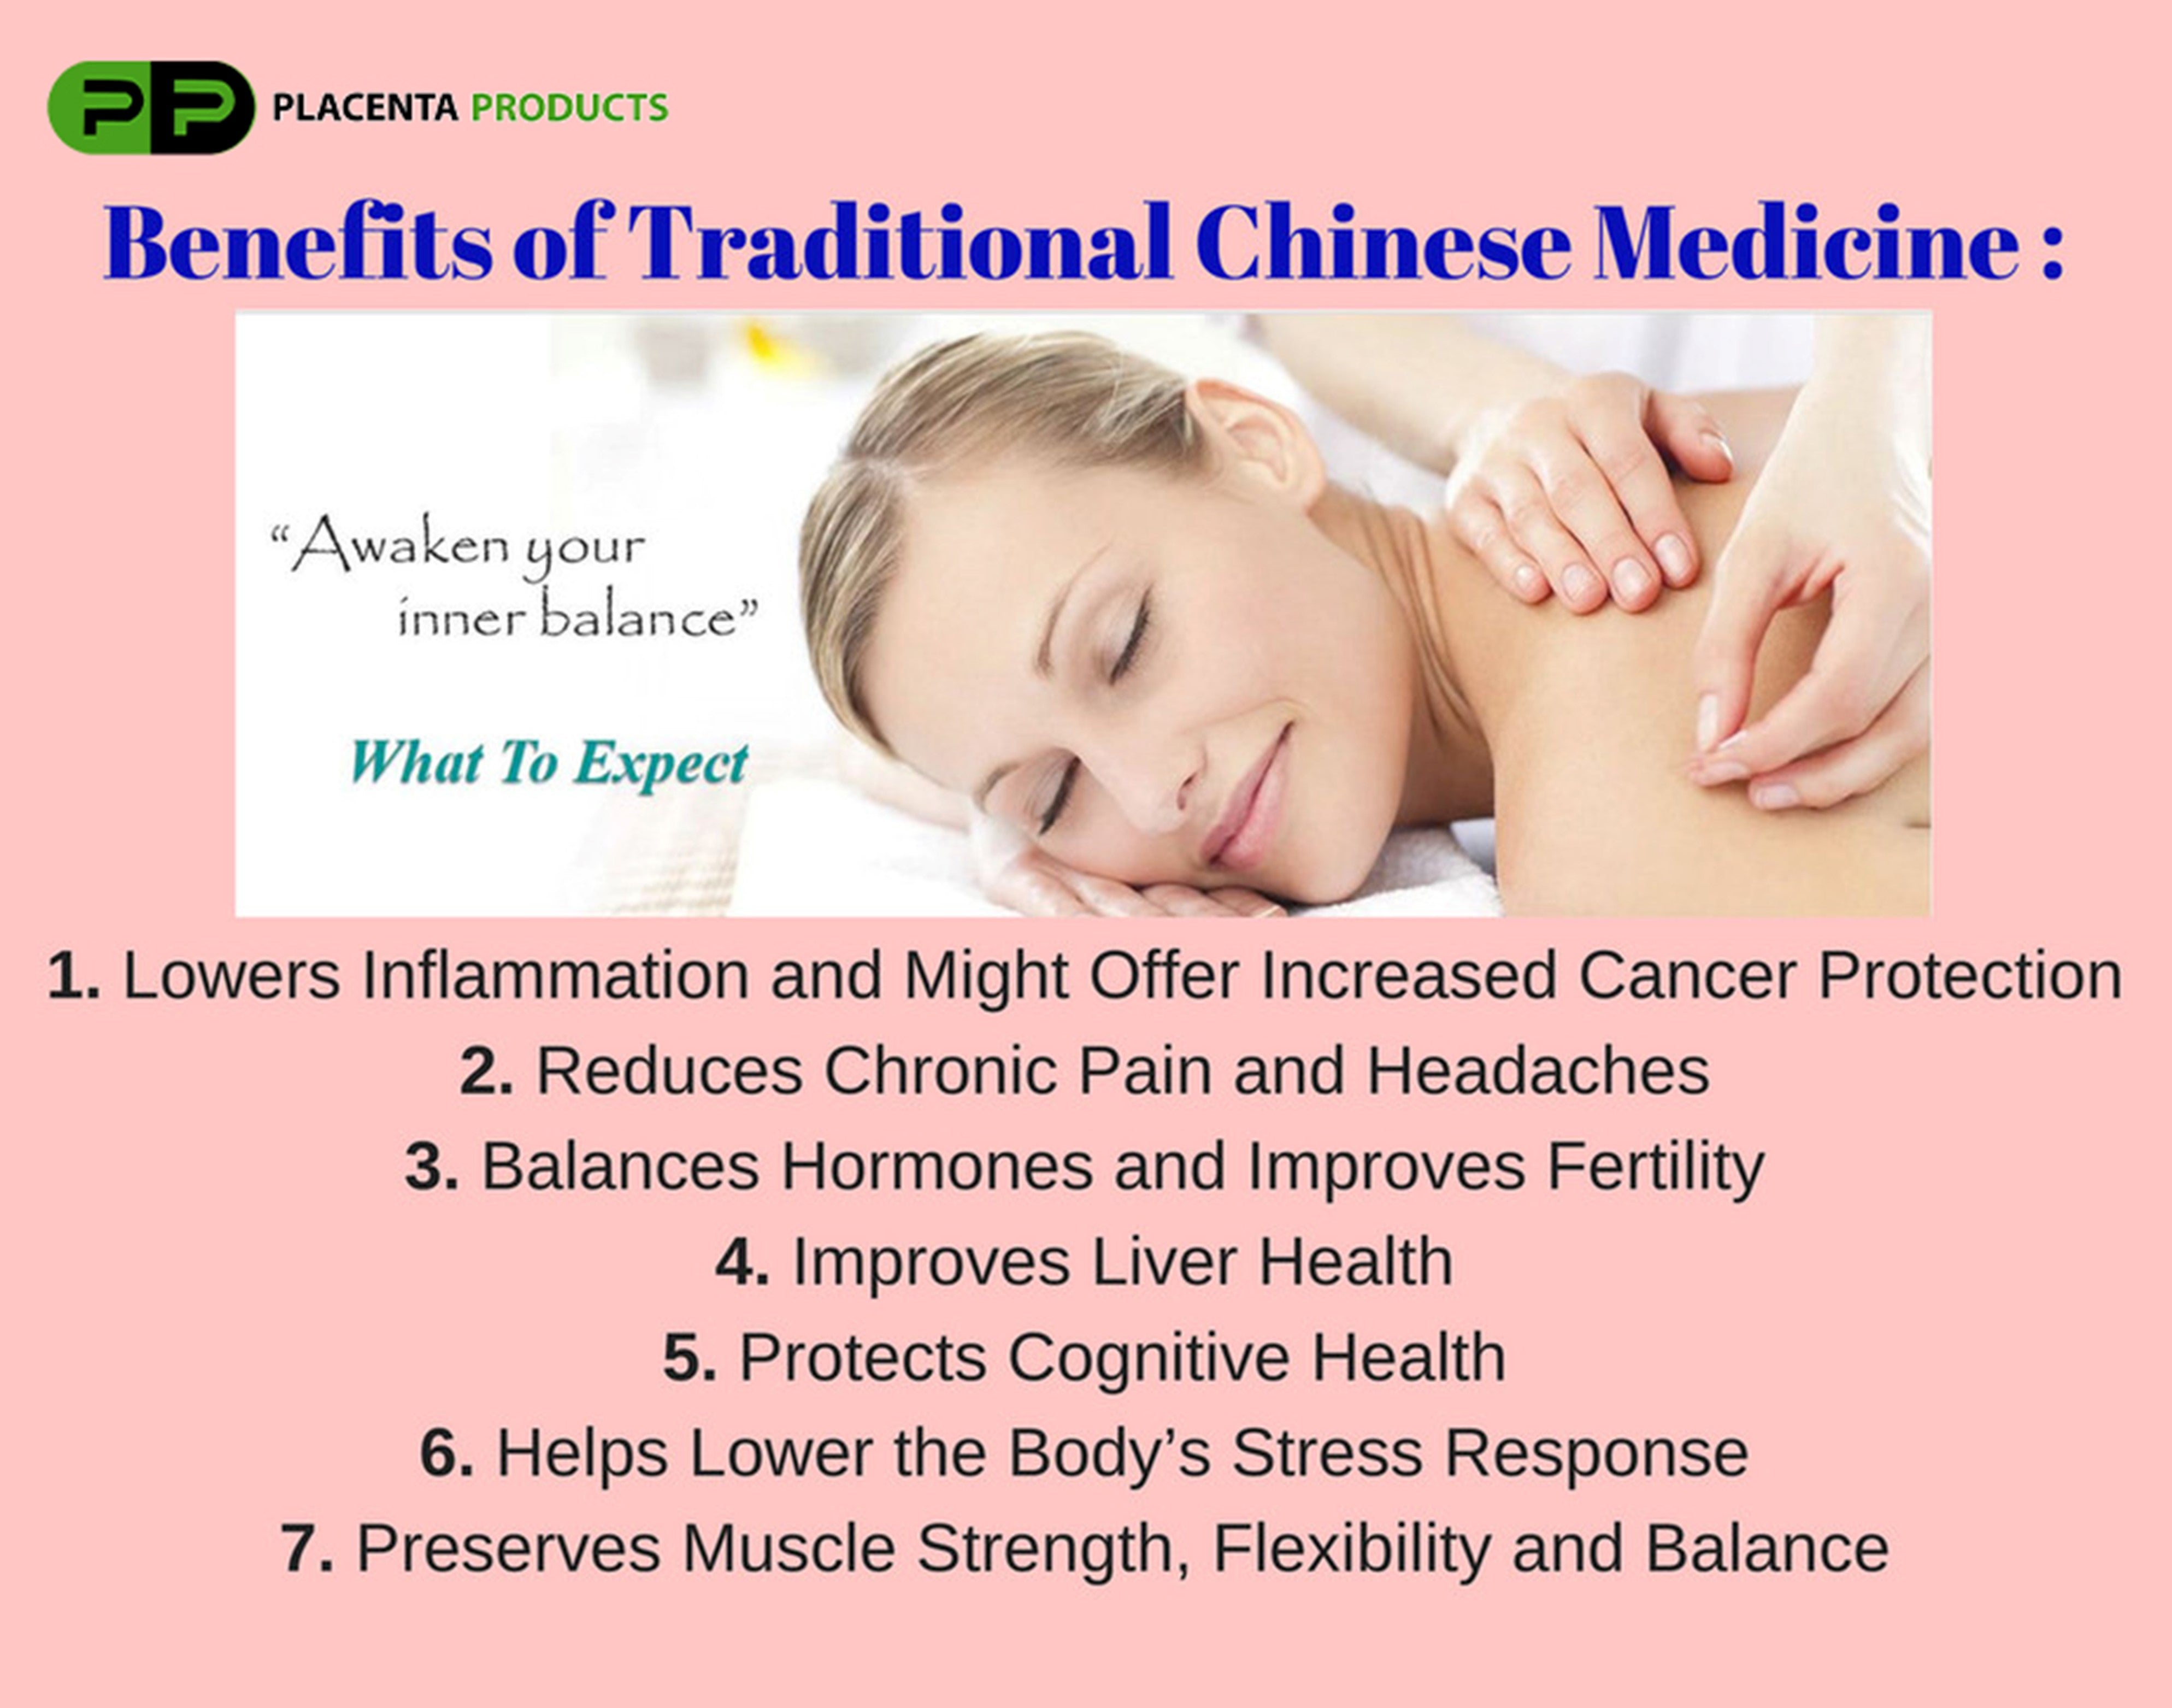 Benefits of Traditional Chinese Medicine